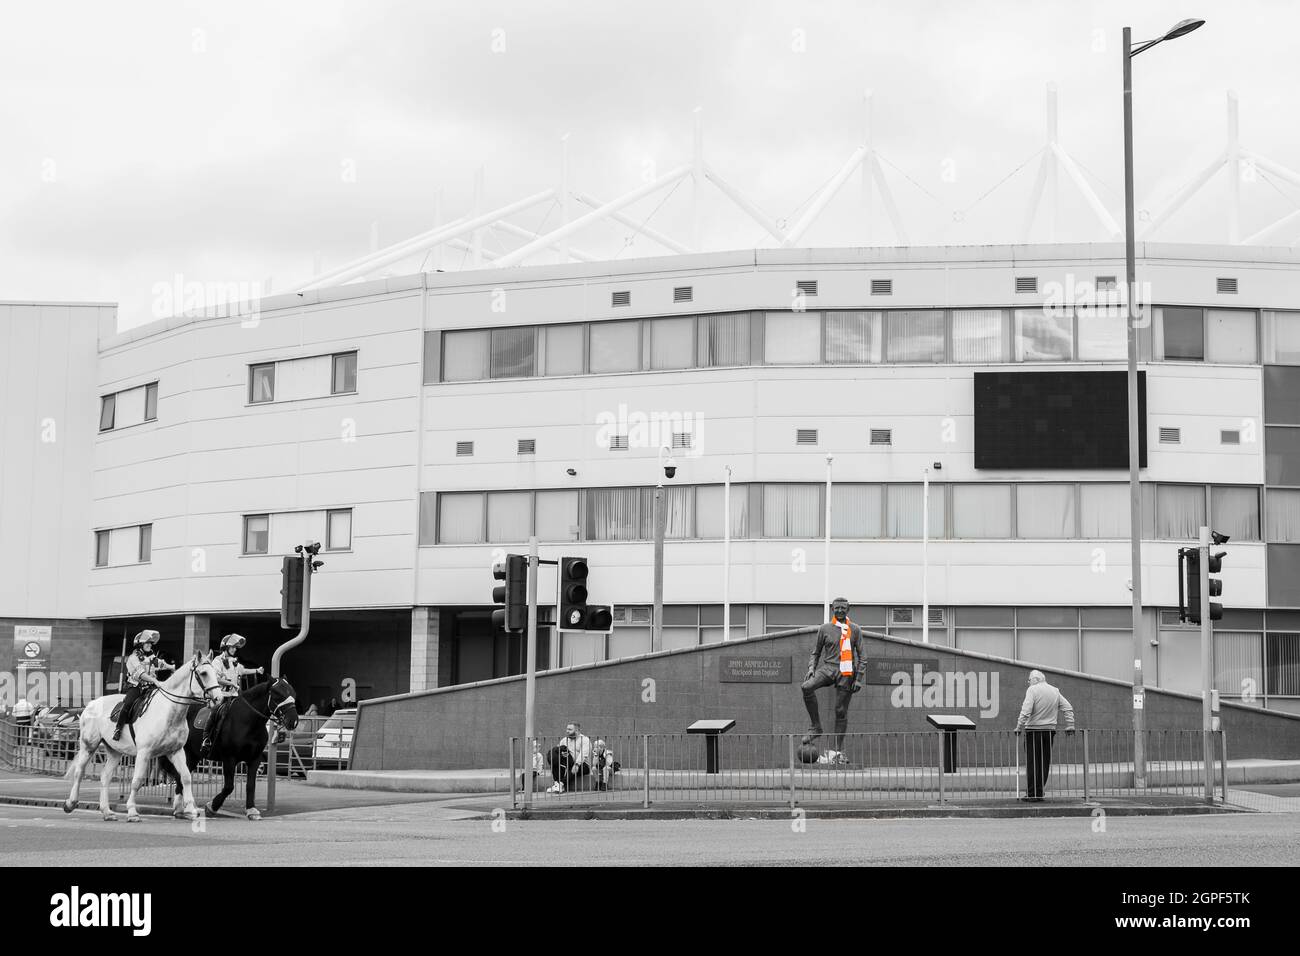 Police on horseback outside Bloomfield Road stadium on a matchday in September 2021 as Blackpool FC welcomed Barnsley FC.  Selective colour has been u Stock Photo